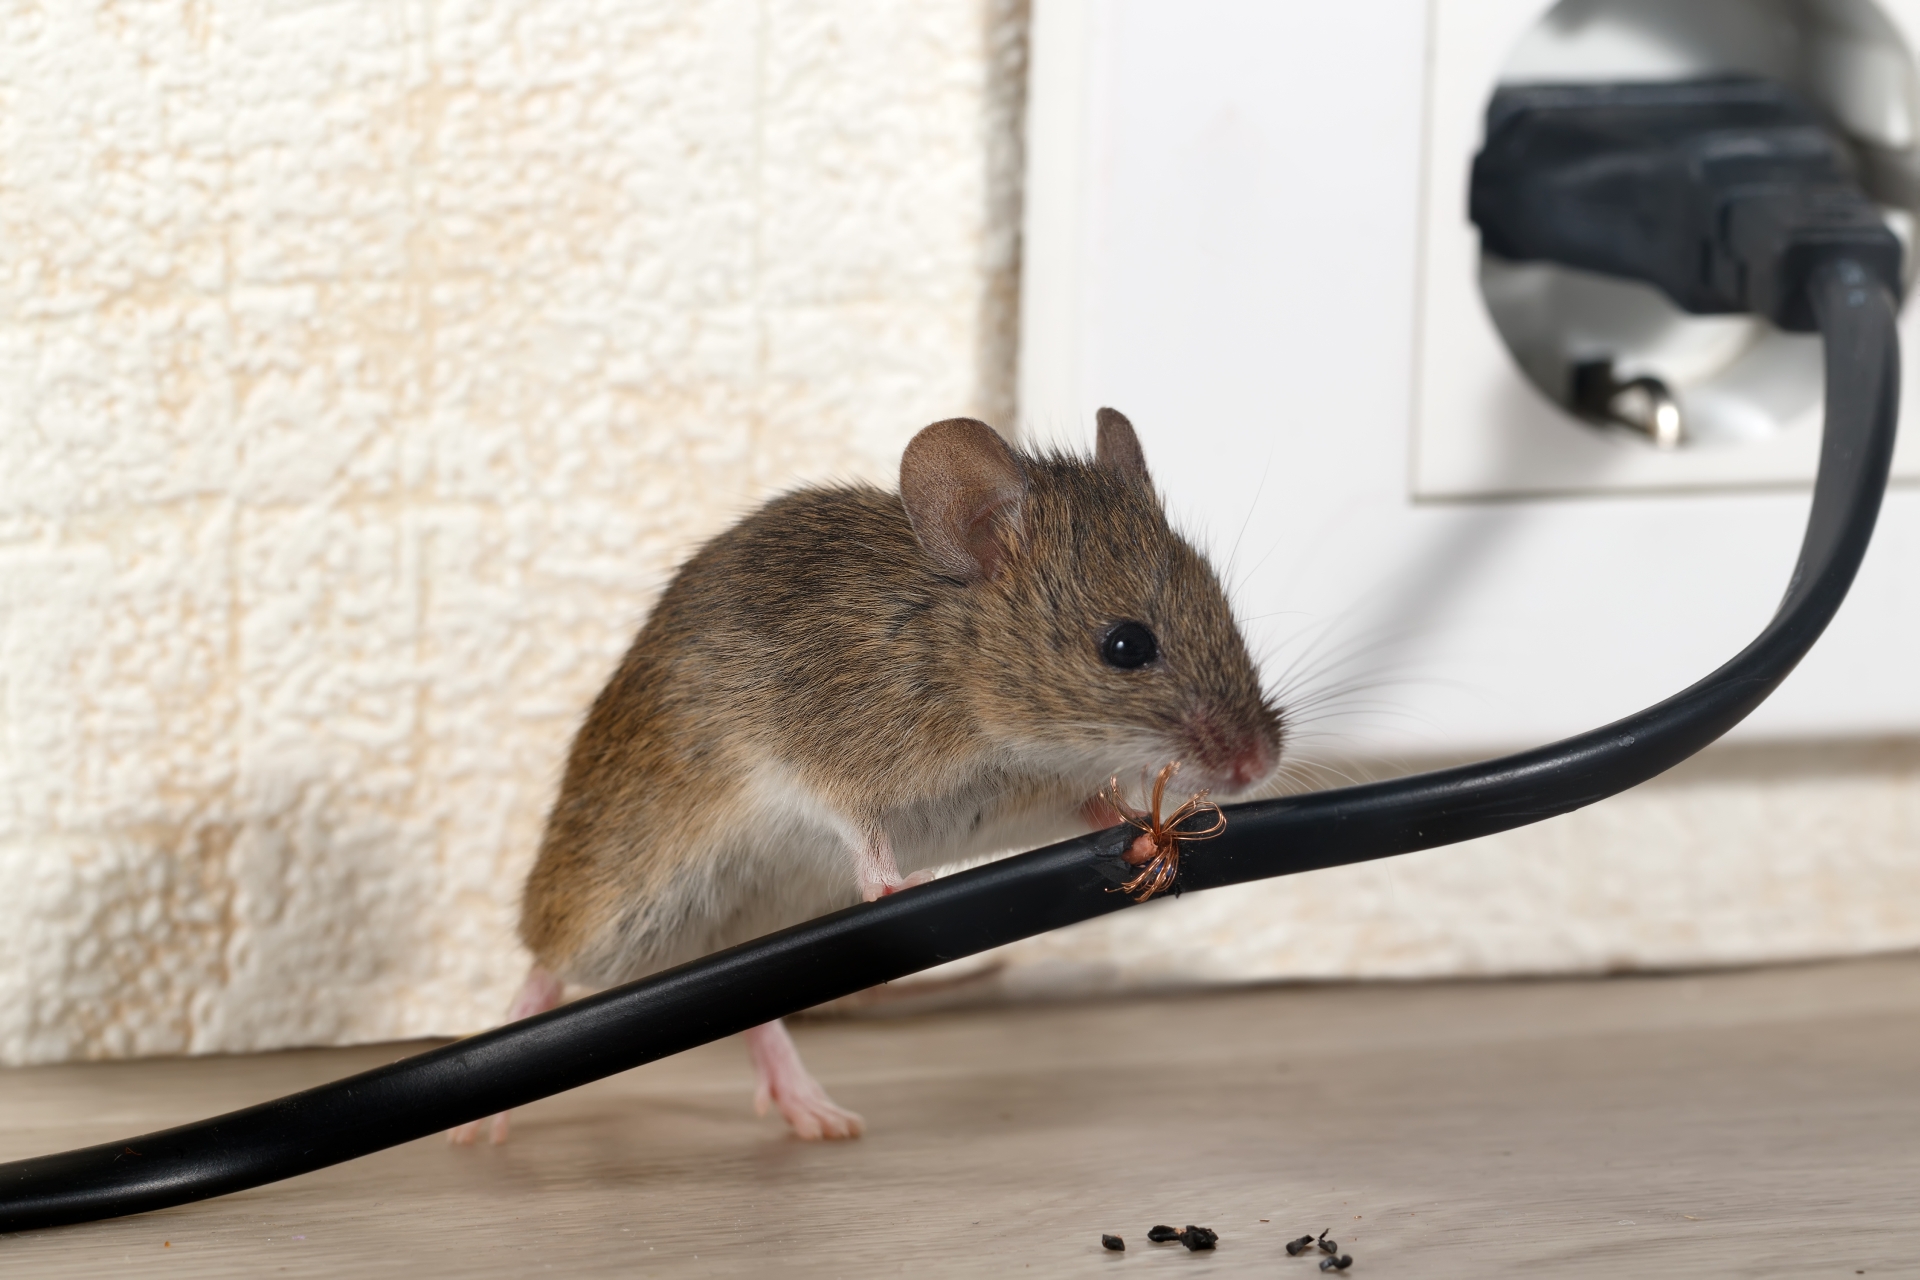 Mice Infestation, Pest Control in Elm Park, RM12. Call Now 020 8166 9746